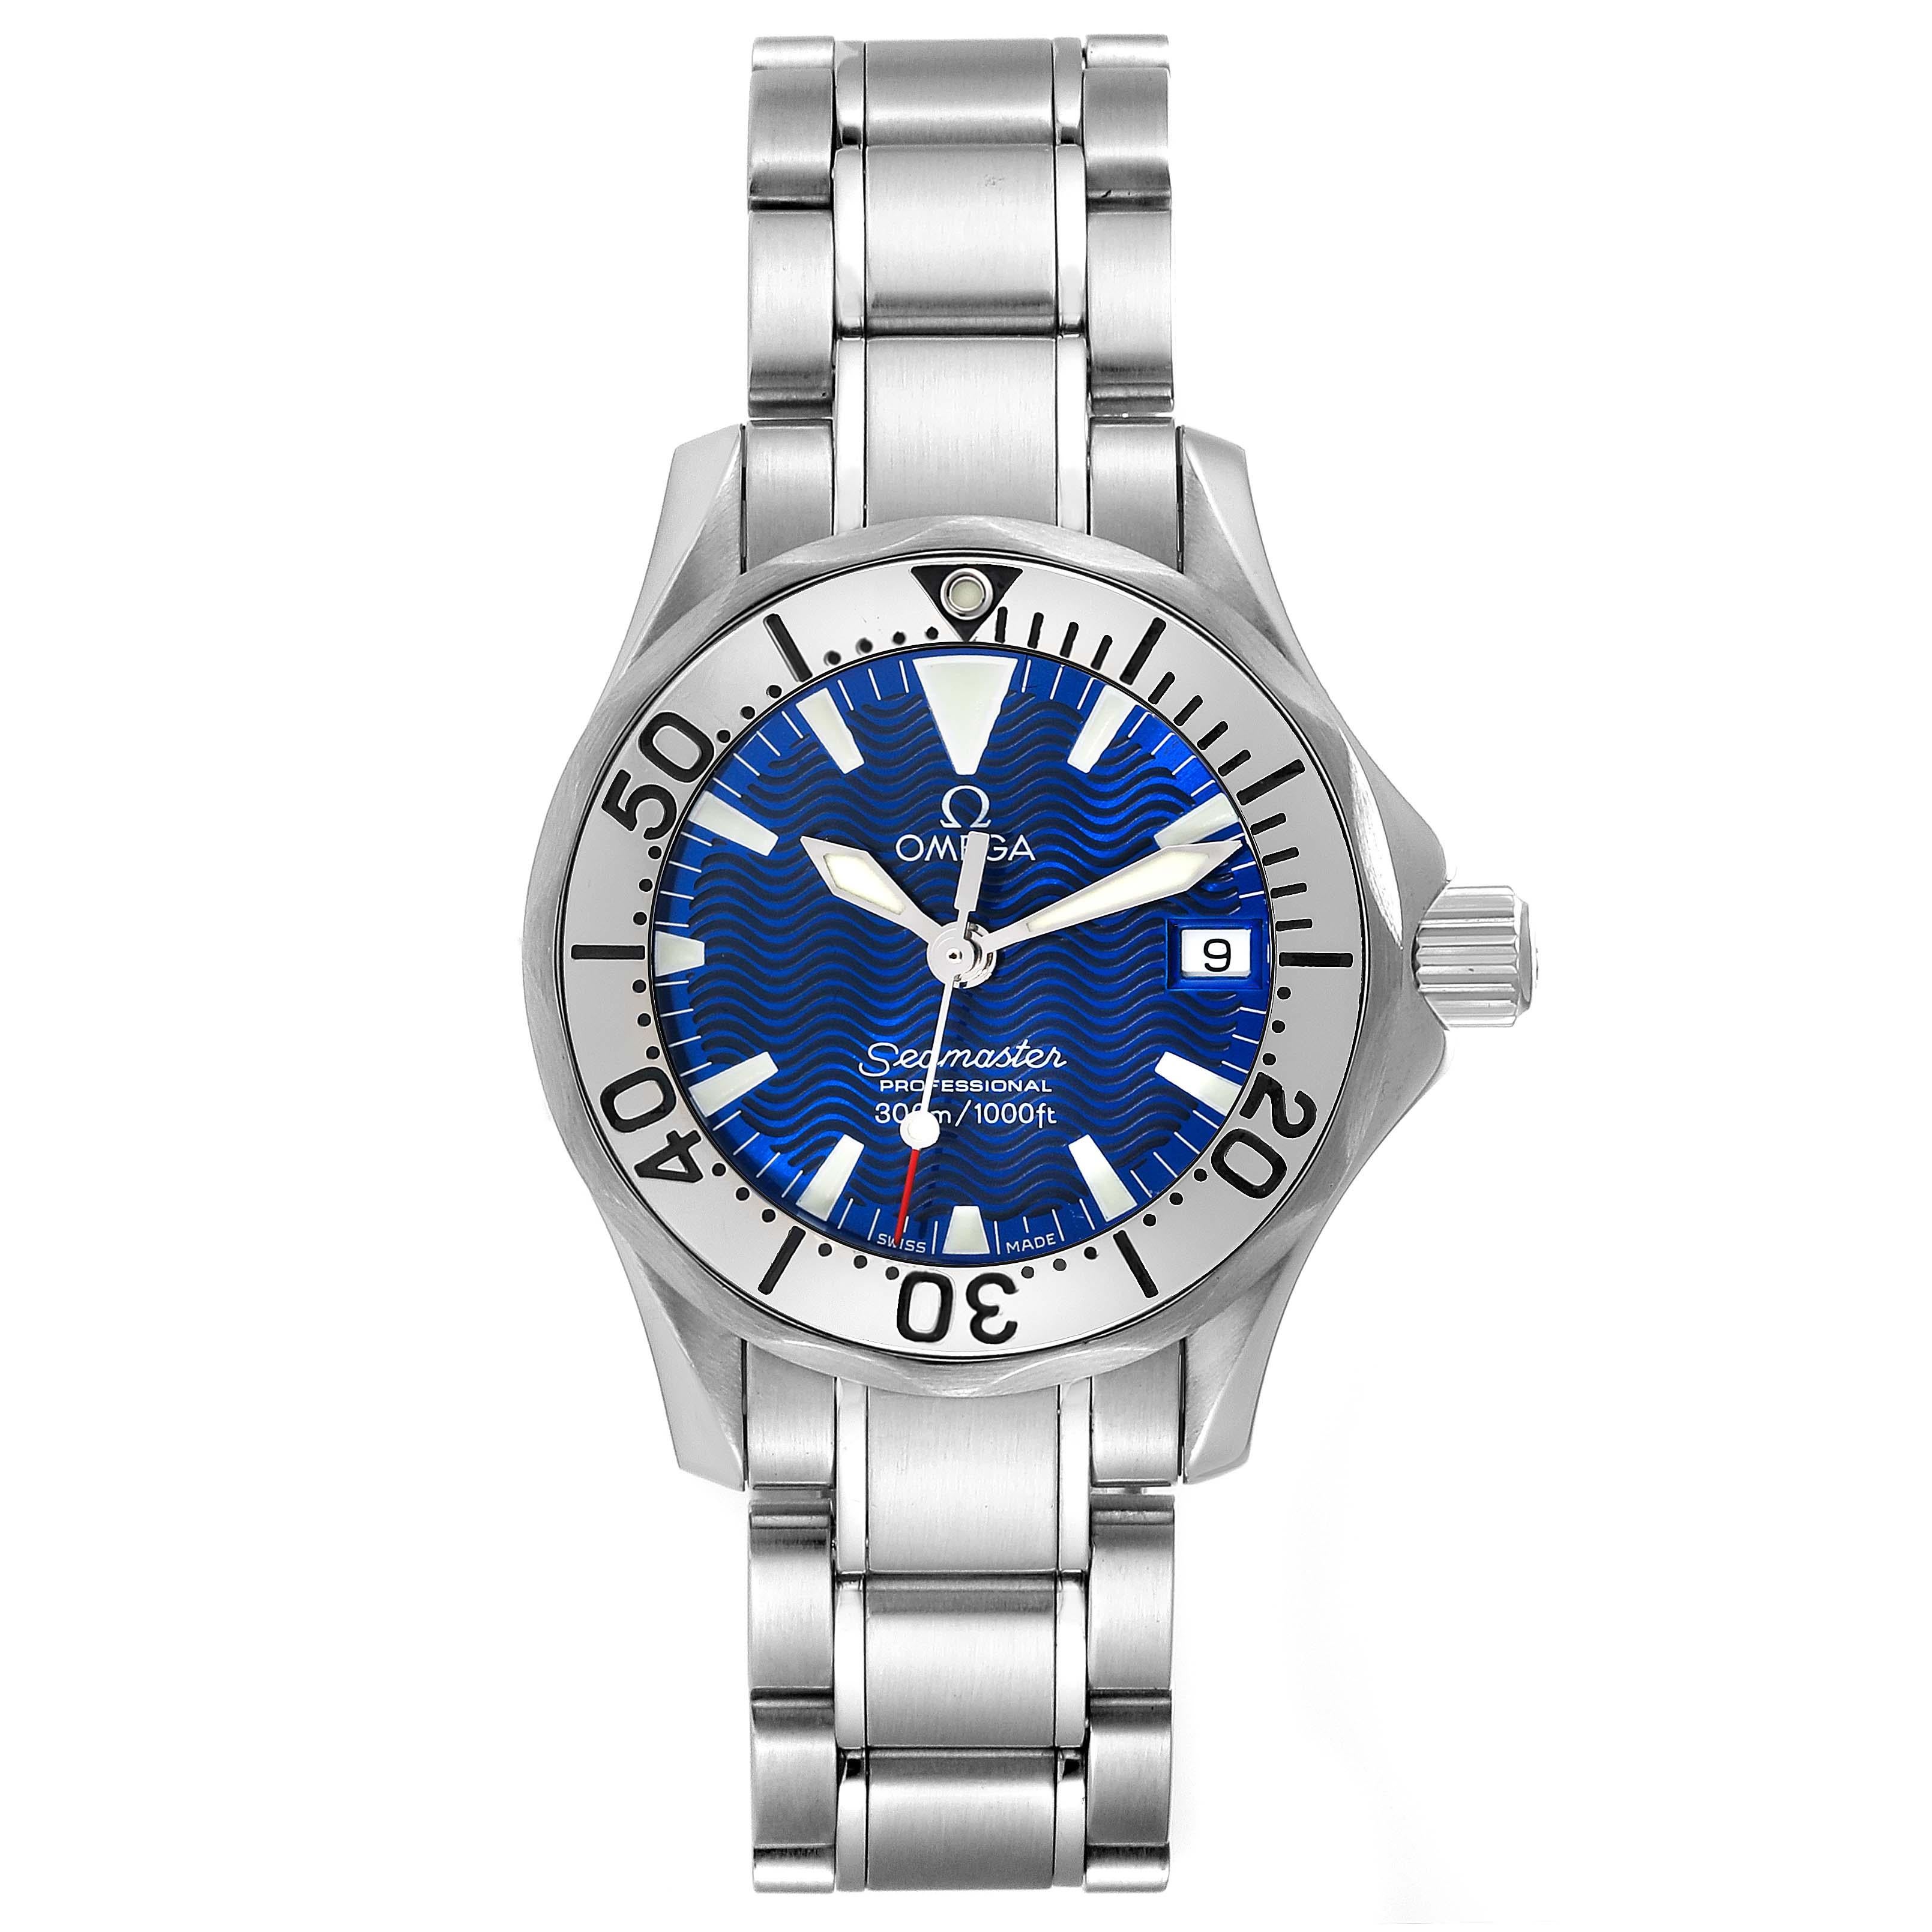 Omega Seamaster Diver Quartz 28mm Steel Ladies Watch 2285.80.00. Quartz movement. Stainless steel round case 28.0 mm in diameter. Stainless steel unidirectional rotating bezel. Scratch resistant sapphire crystal. Electric blue wave decor dial with